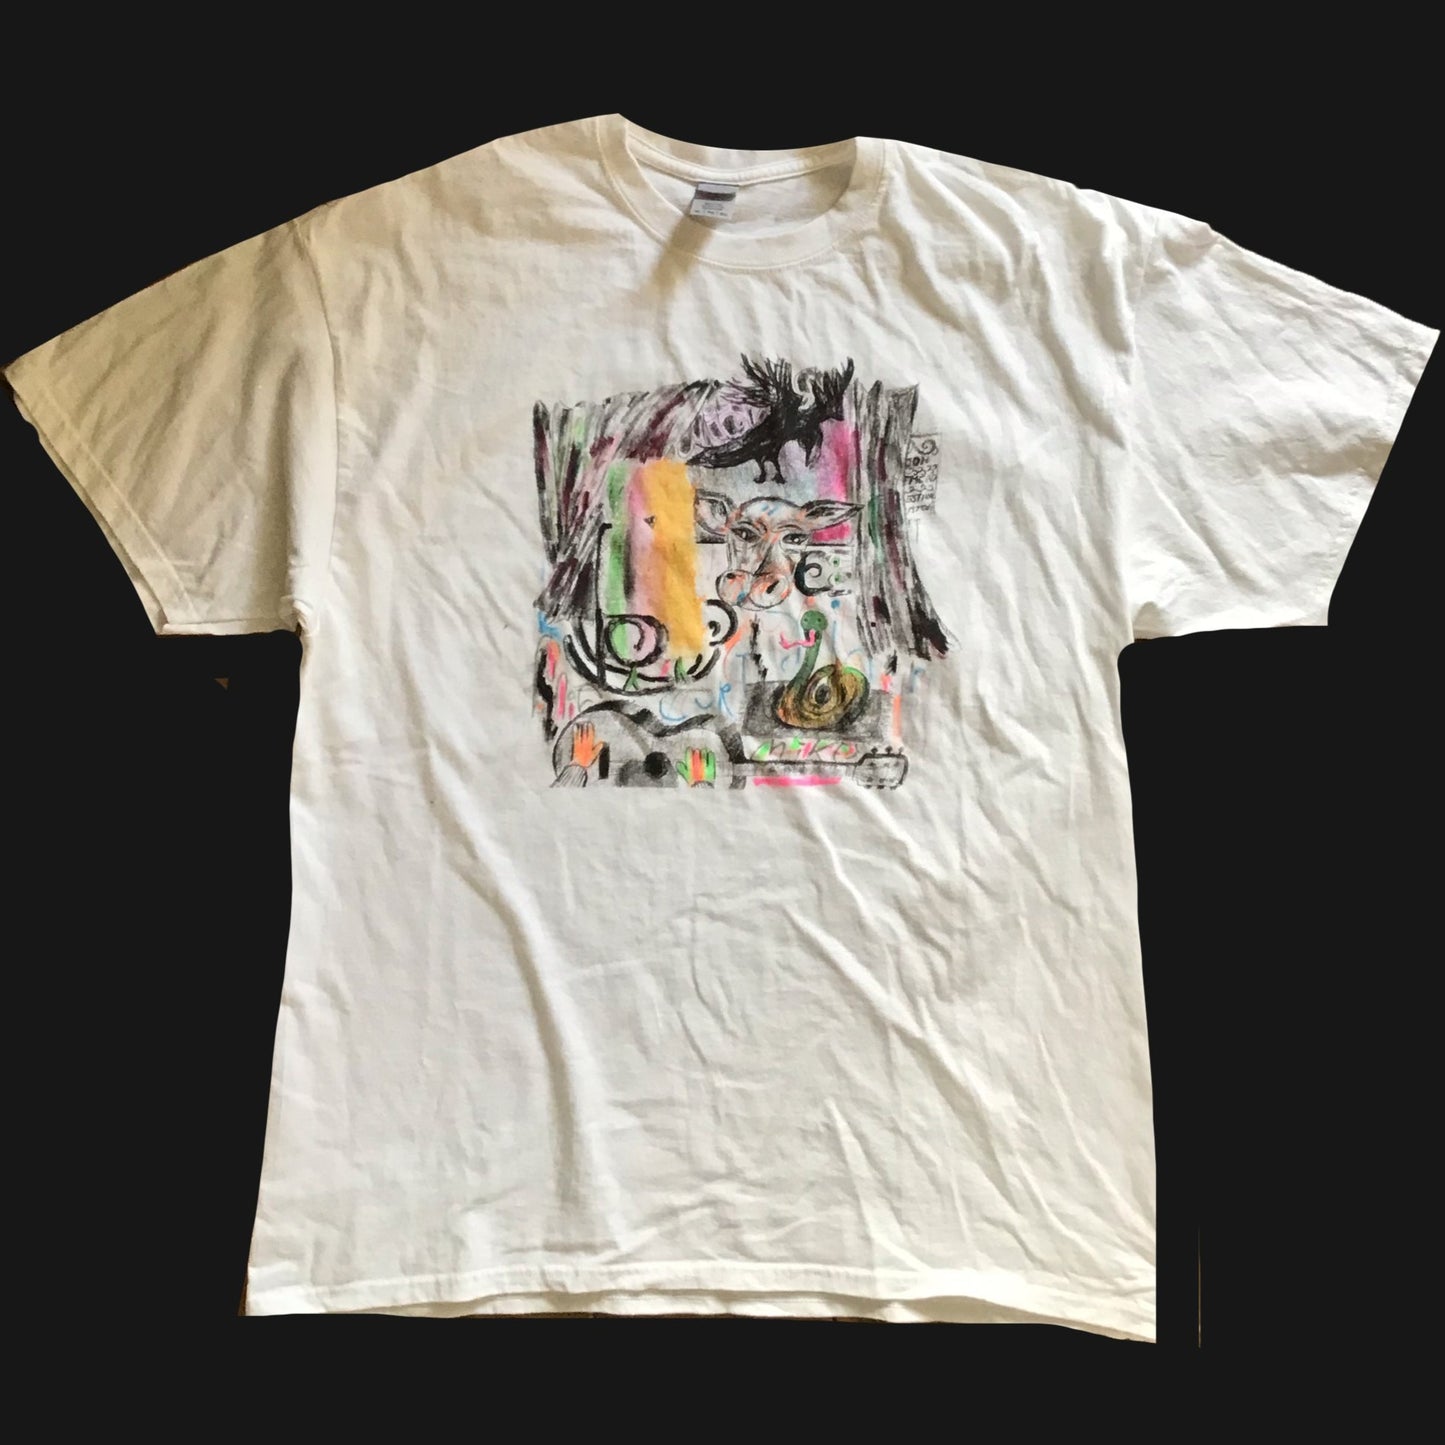 ANNA SAVAGE, LEW & JAMES VINCIGUERRA - "MIKEY YOUNG: CURTAINS" T-SHIRT